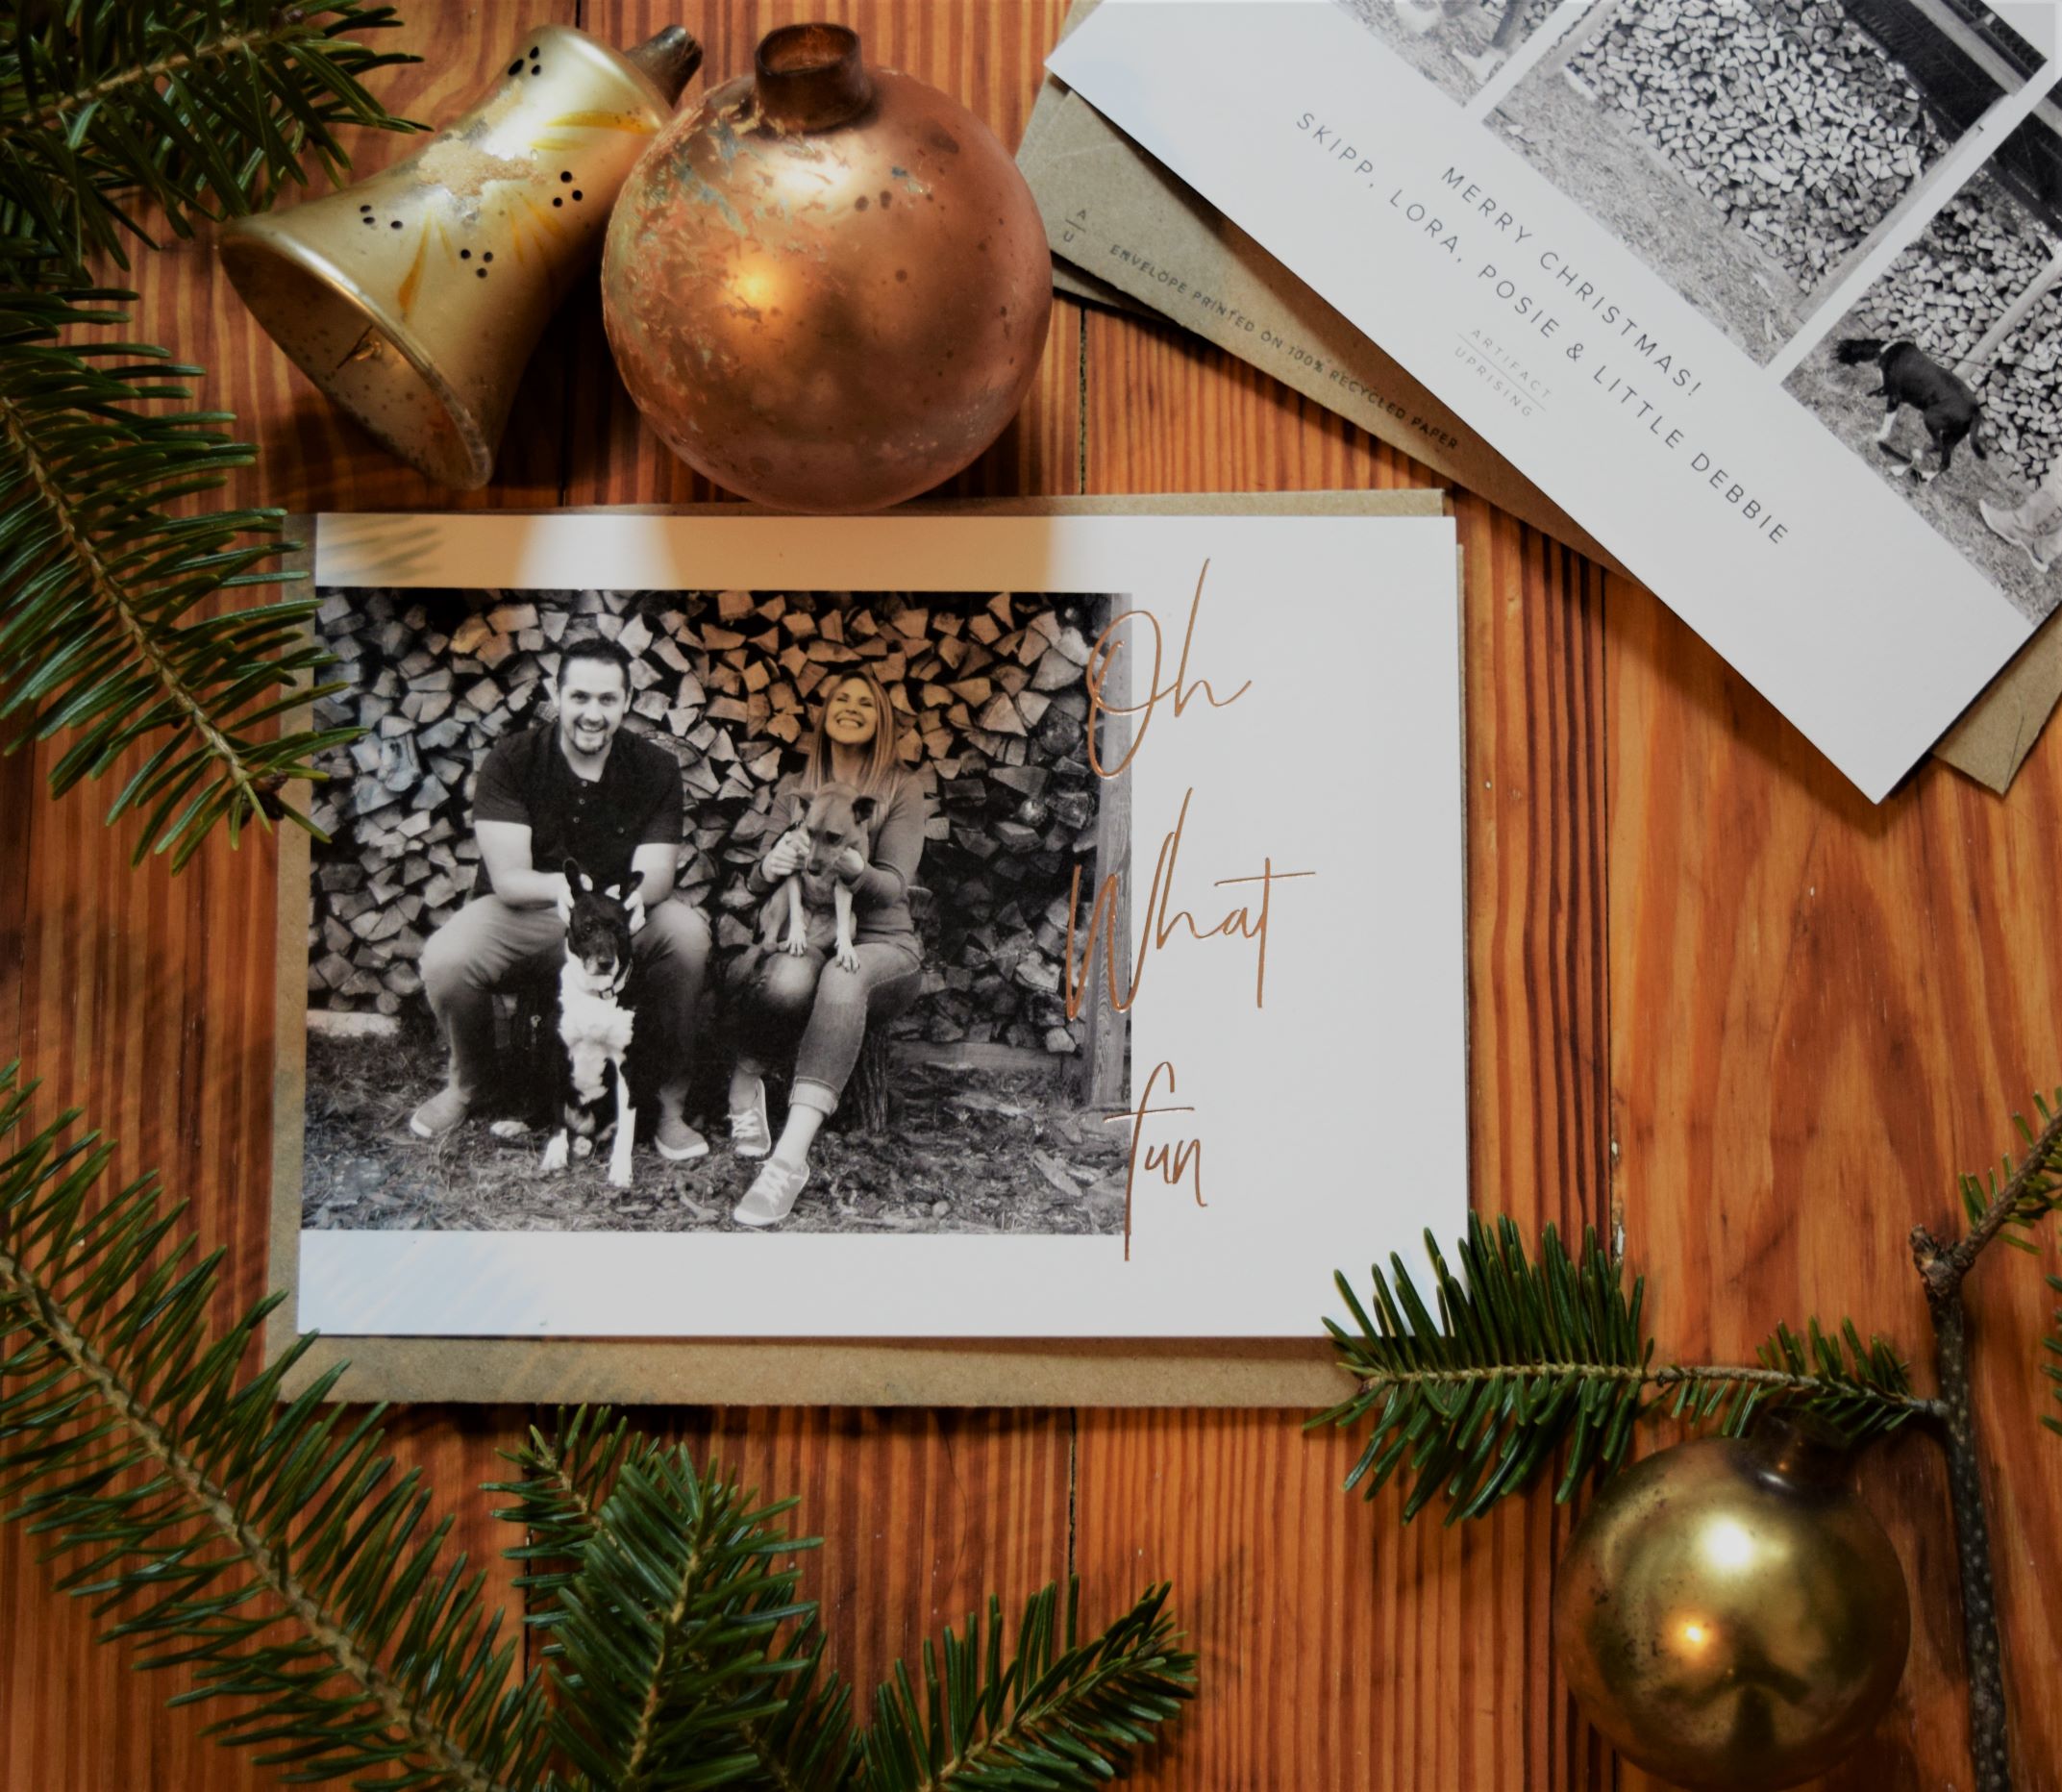 How to Take the Perfect Christmas Card Photo